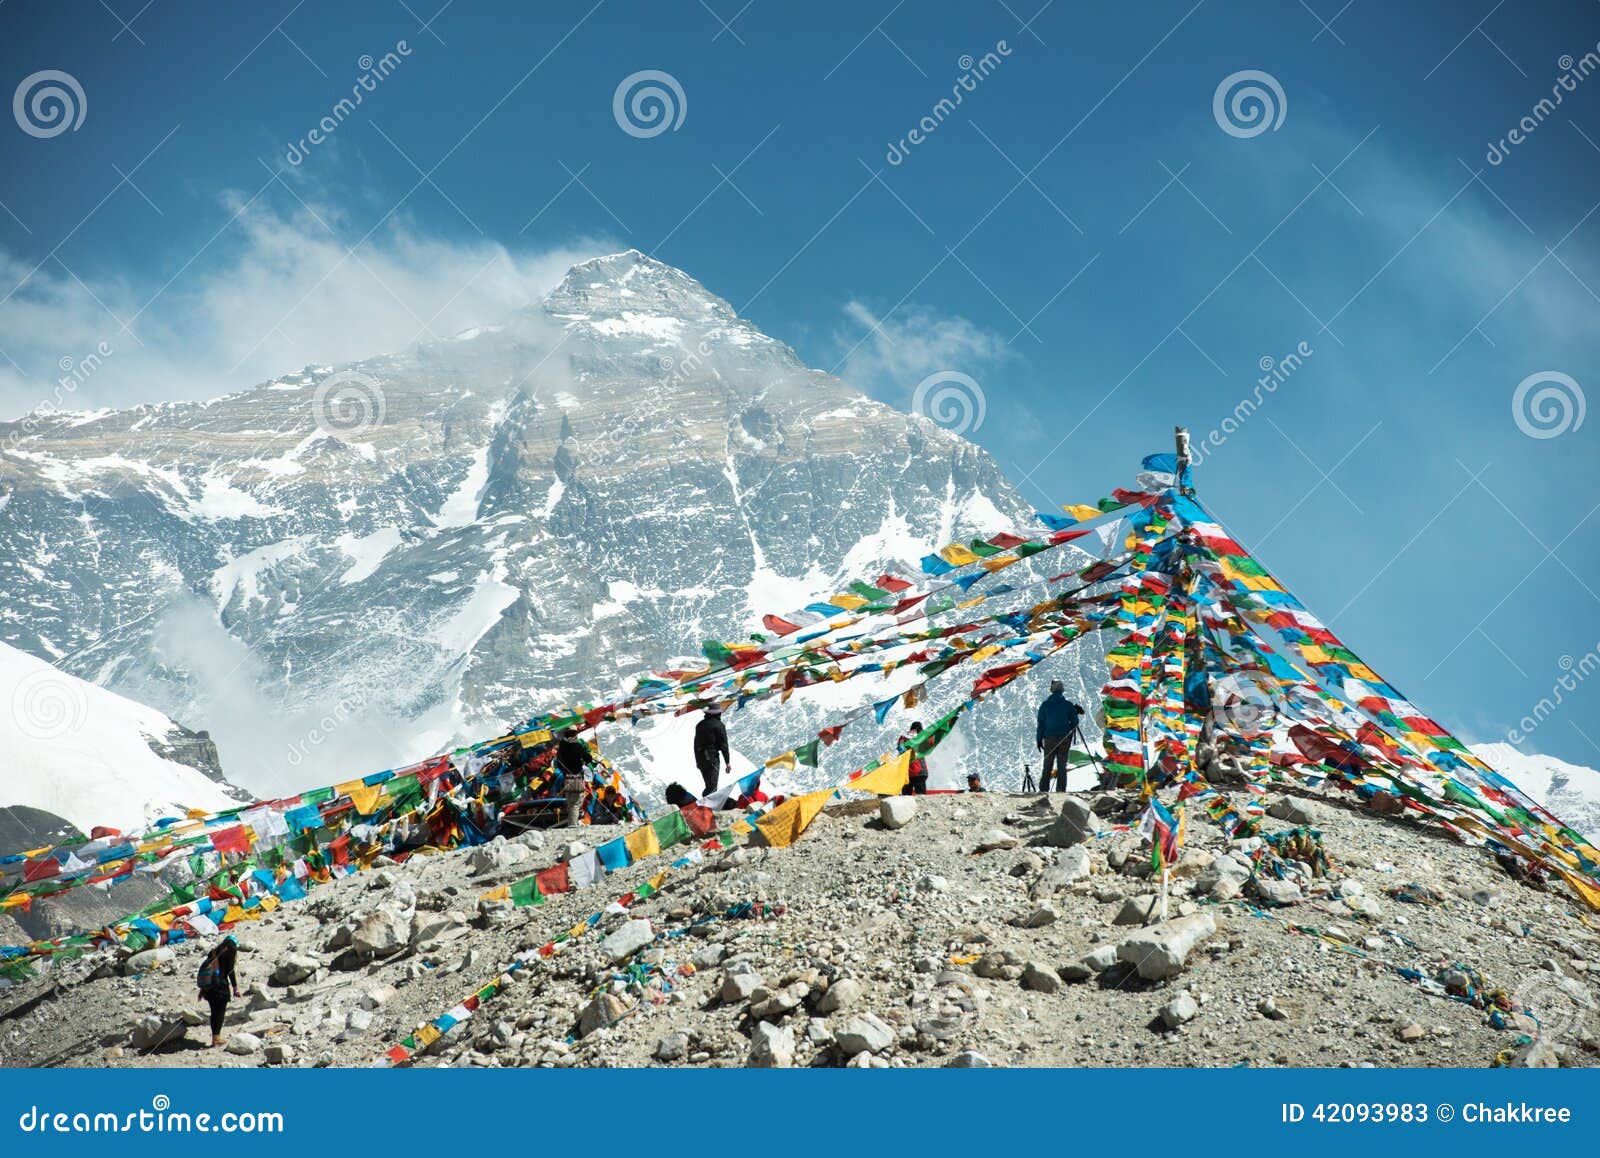 spectacular mountain scenery on the mount everest base camp